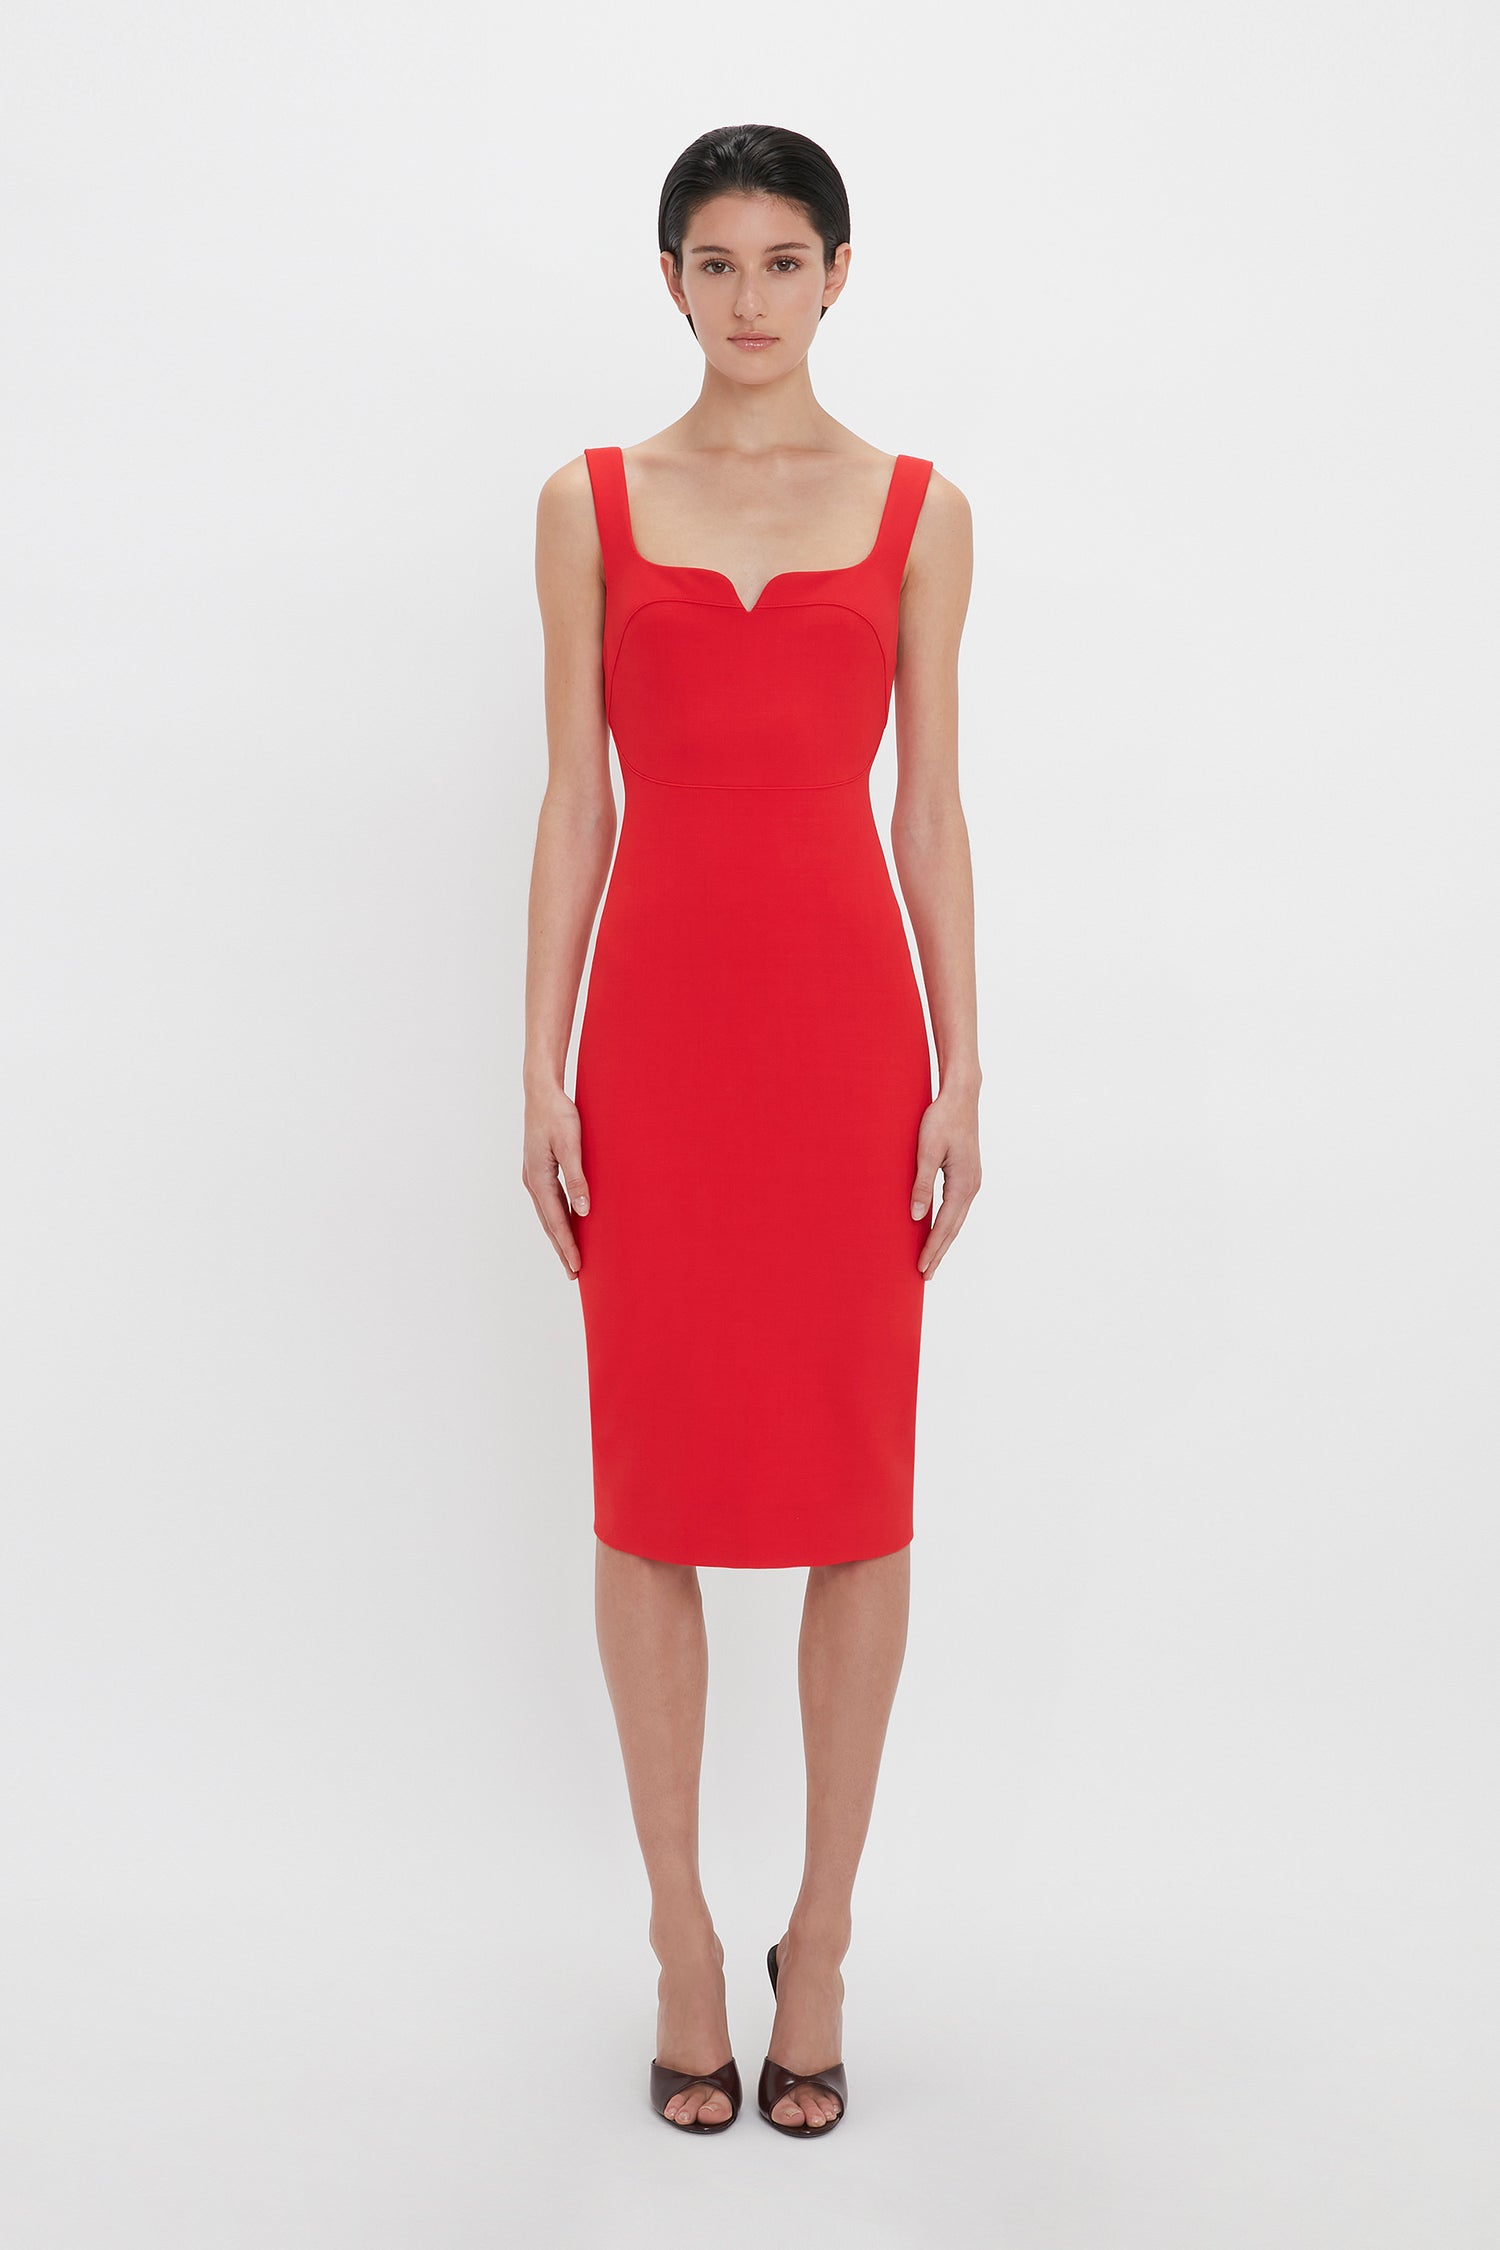 Person standing against a plain background, wearing a Sleeveless Fitted T-Shirt Dress In Bright Red by Victoria Beckham, and black high-heeled shoes.